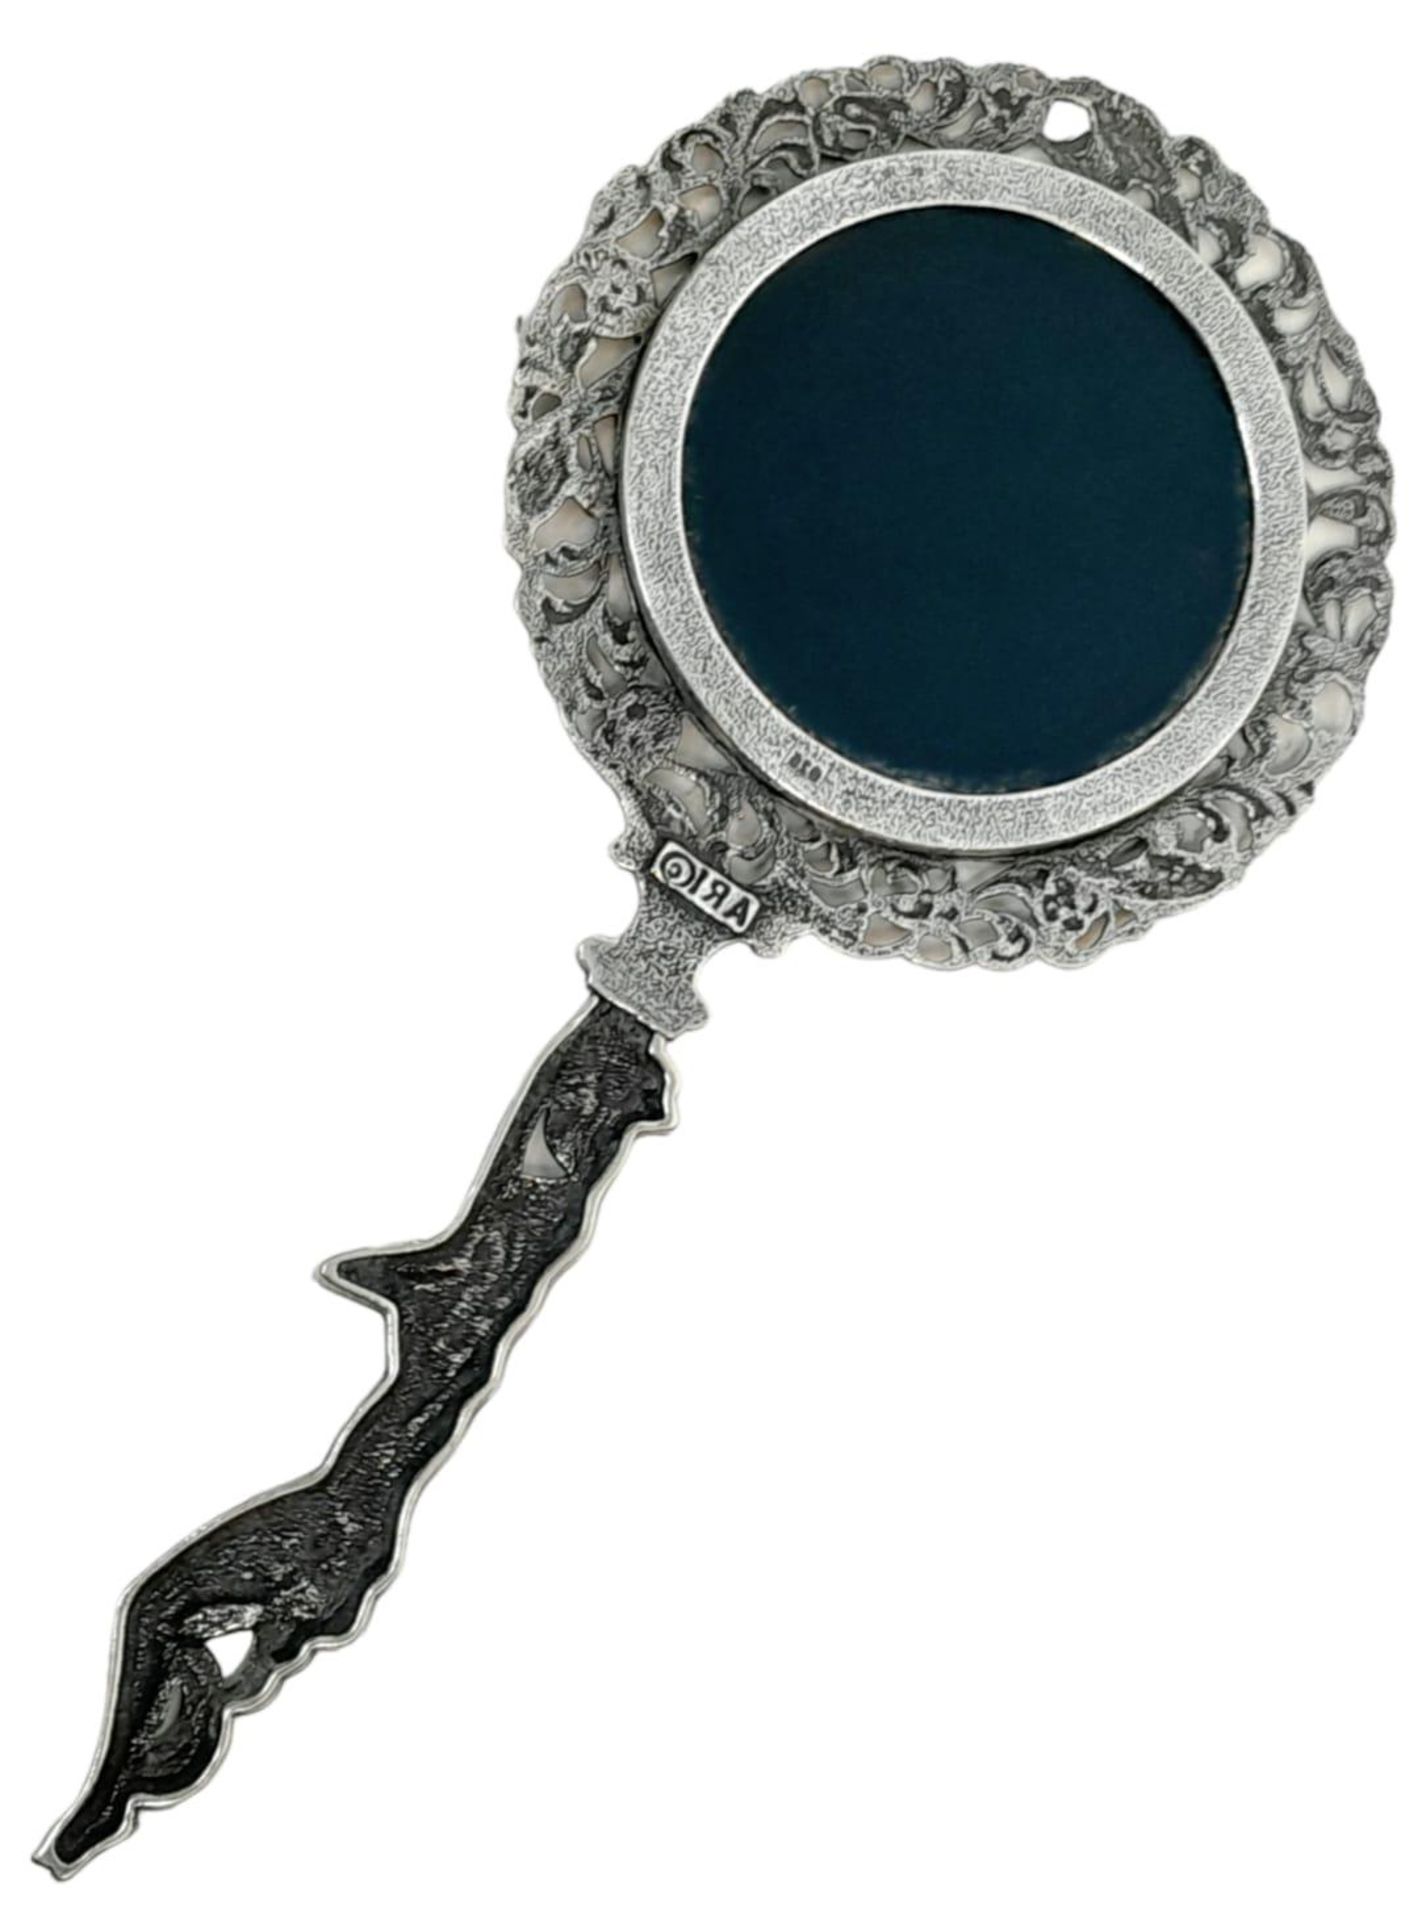 An Art Nouveau sterling silver vanity mirror, length: 16 cm, weight: 45 g. - Image 2 of 4